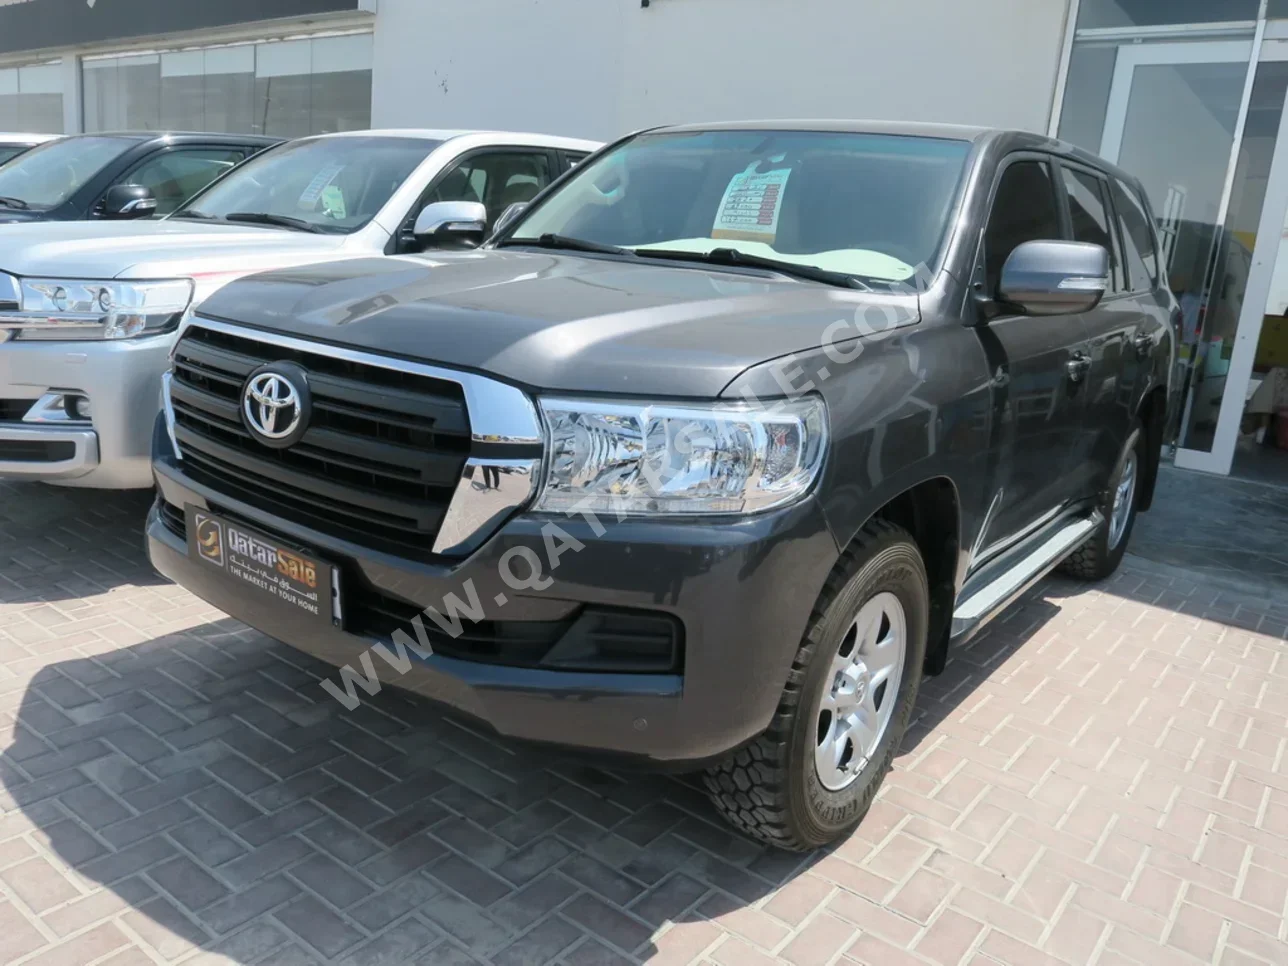 Toyota  Land Cruiser  G  2020  Automatic  69,000 Km  6 Cylinder  Four Wheel Drive (4WD)  SUV  Gray